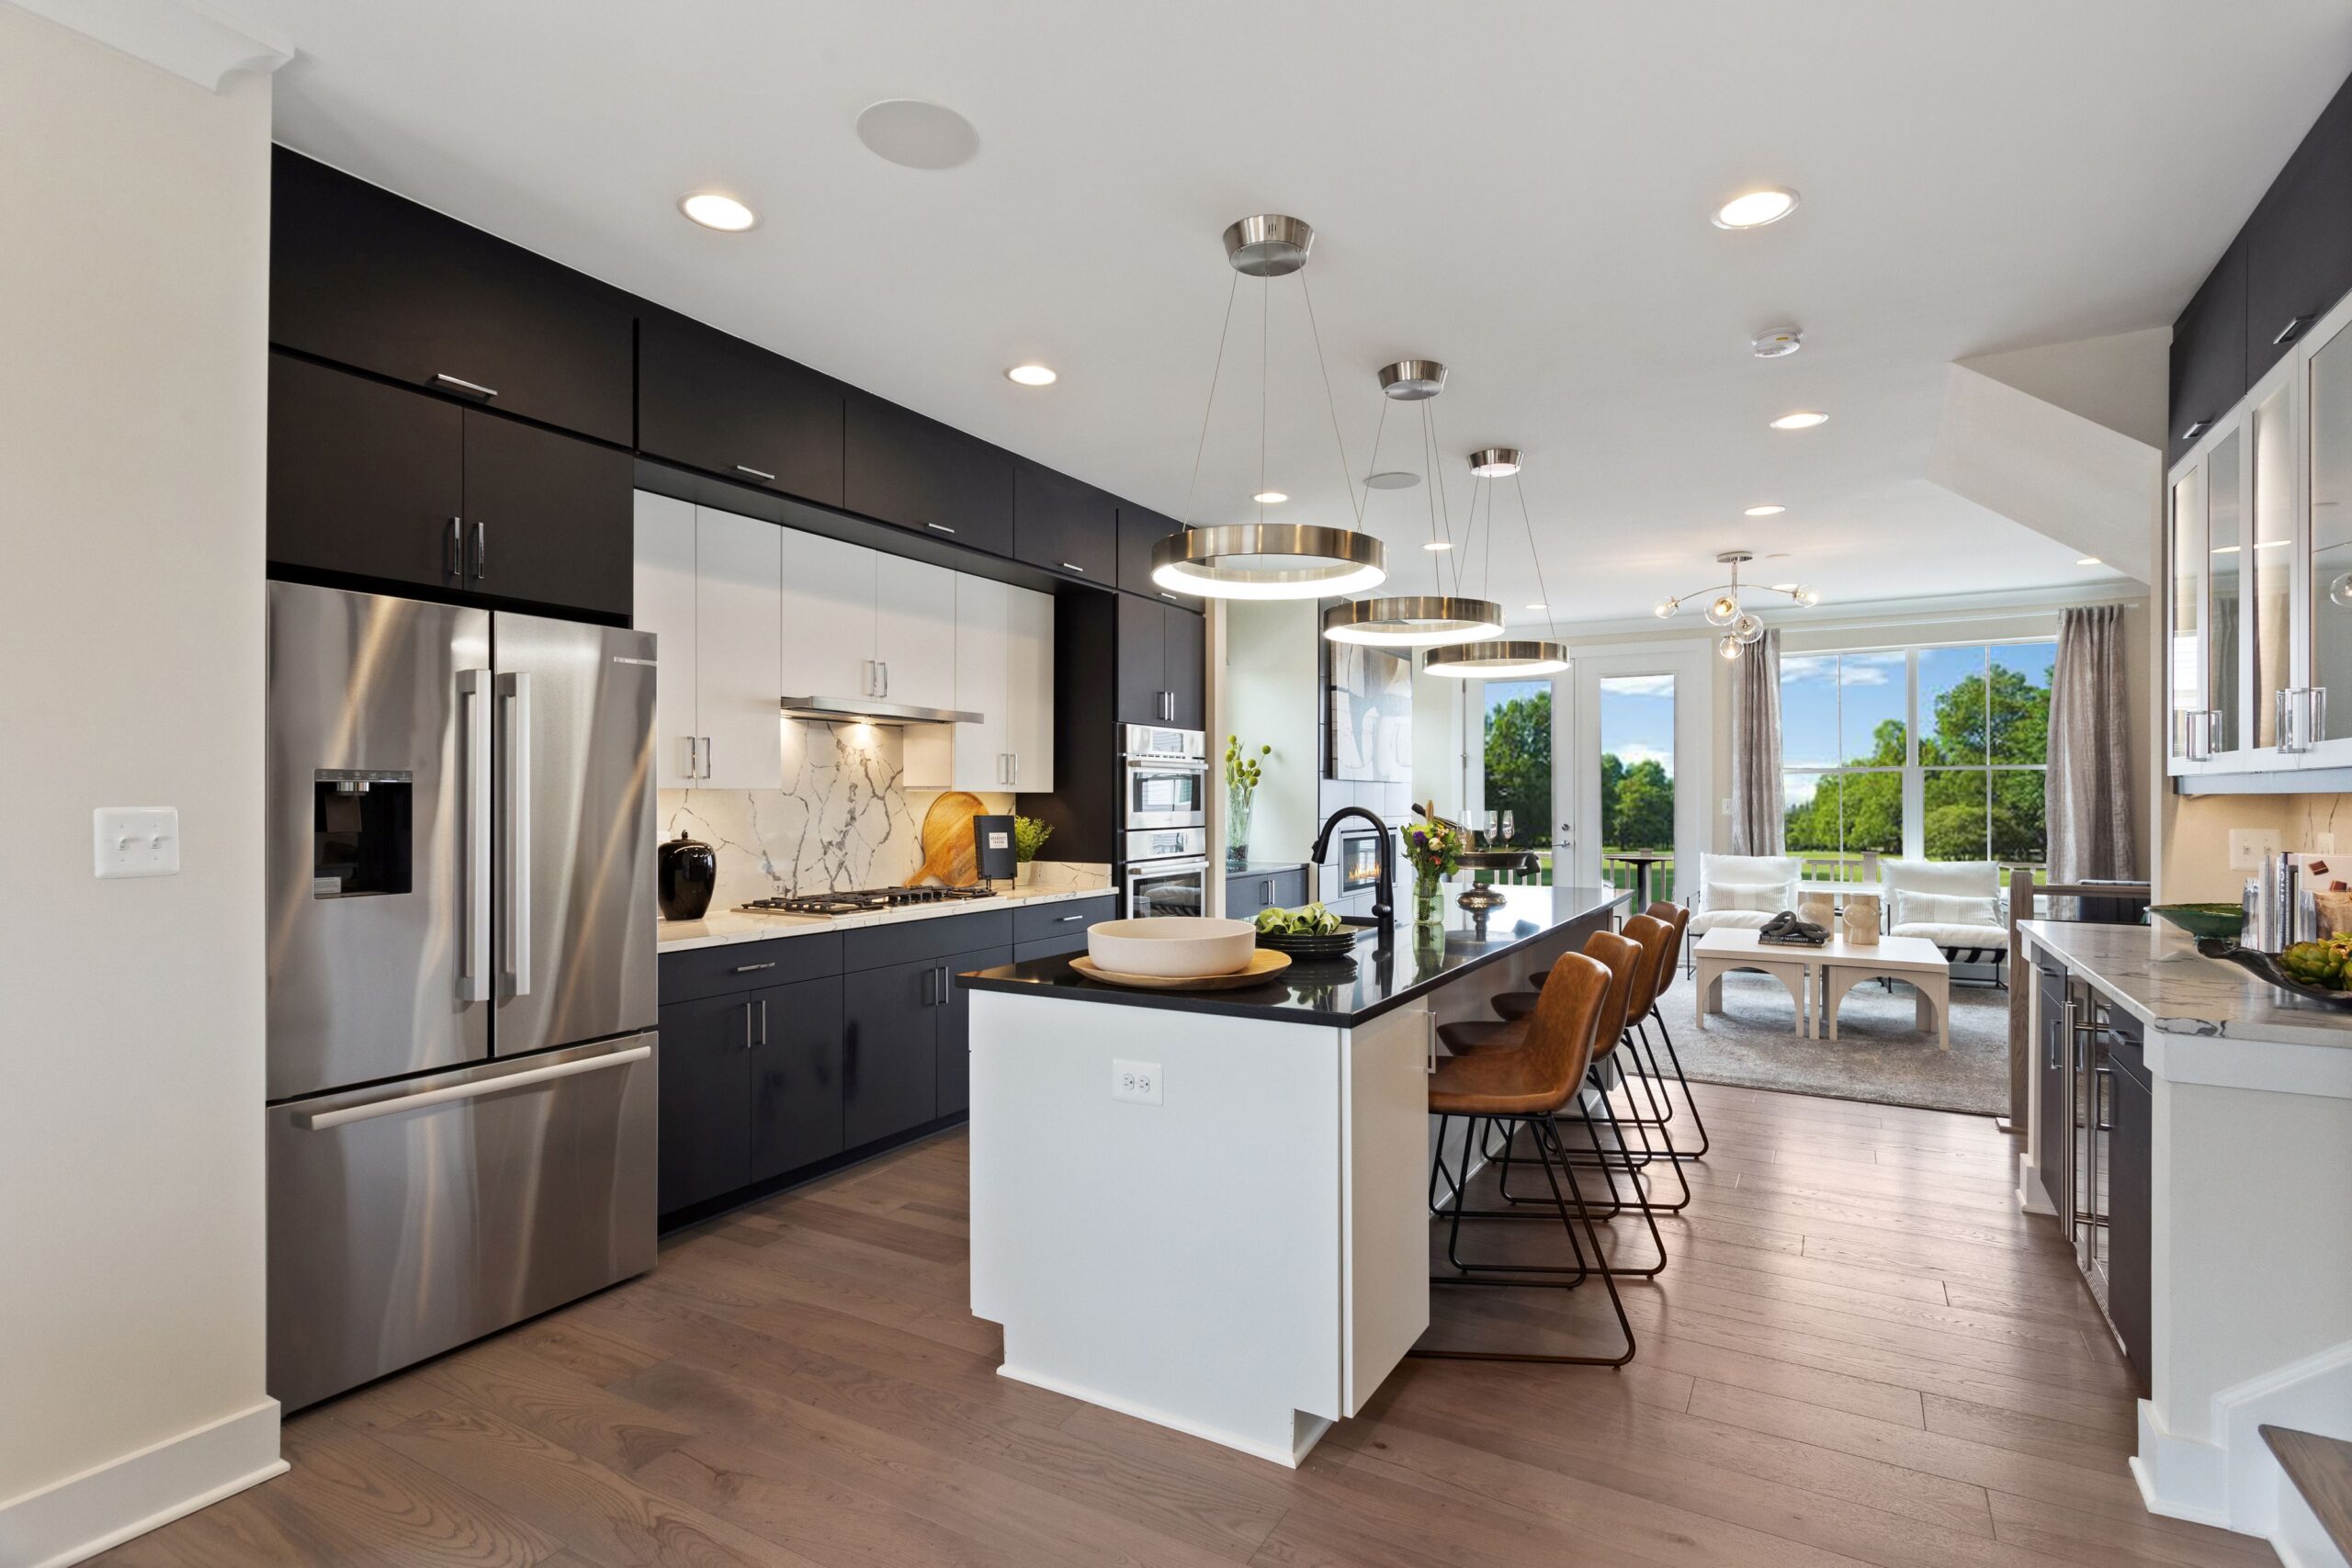 Craftmark offers high-end included features like Shaw® 7 Vinyl Plank flooring, a sweeping kitchen island, and Energy Star® Bosch® stainless steel appliances.